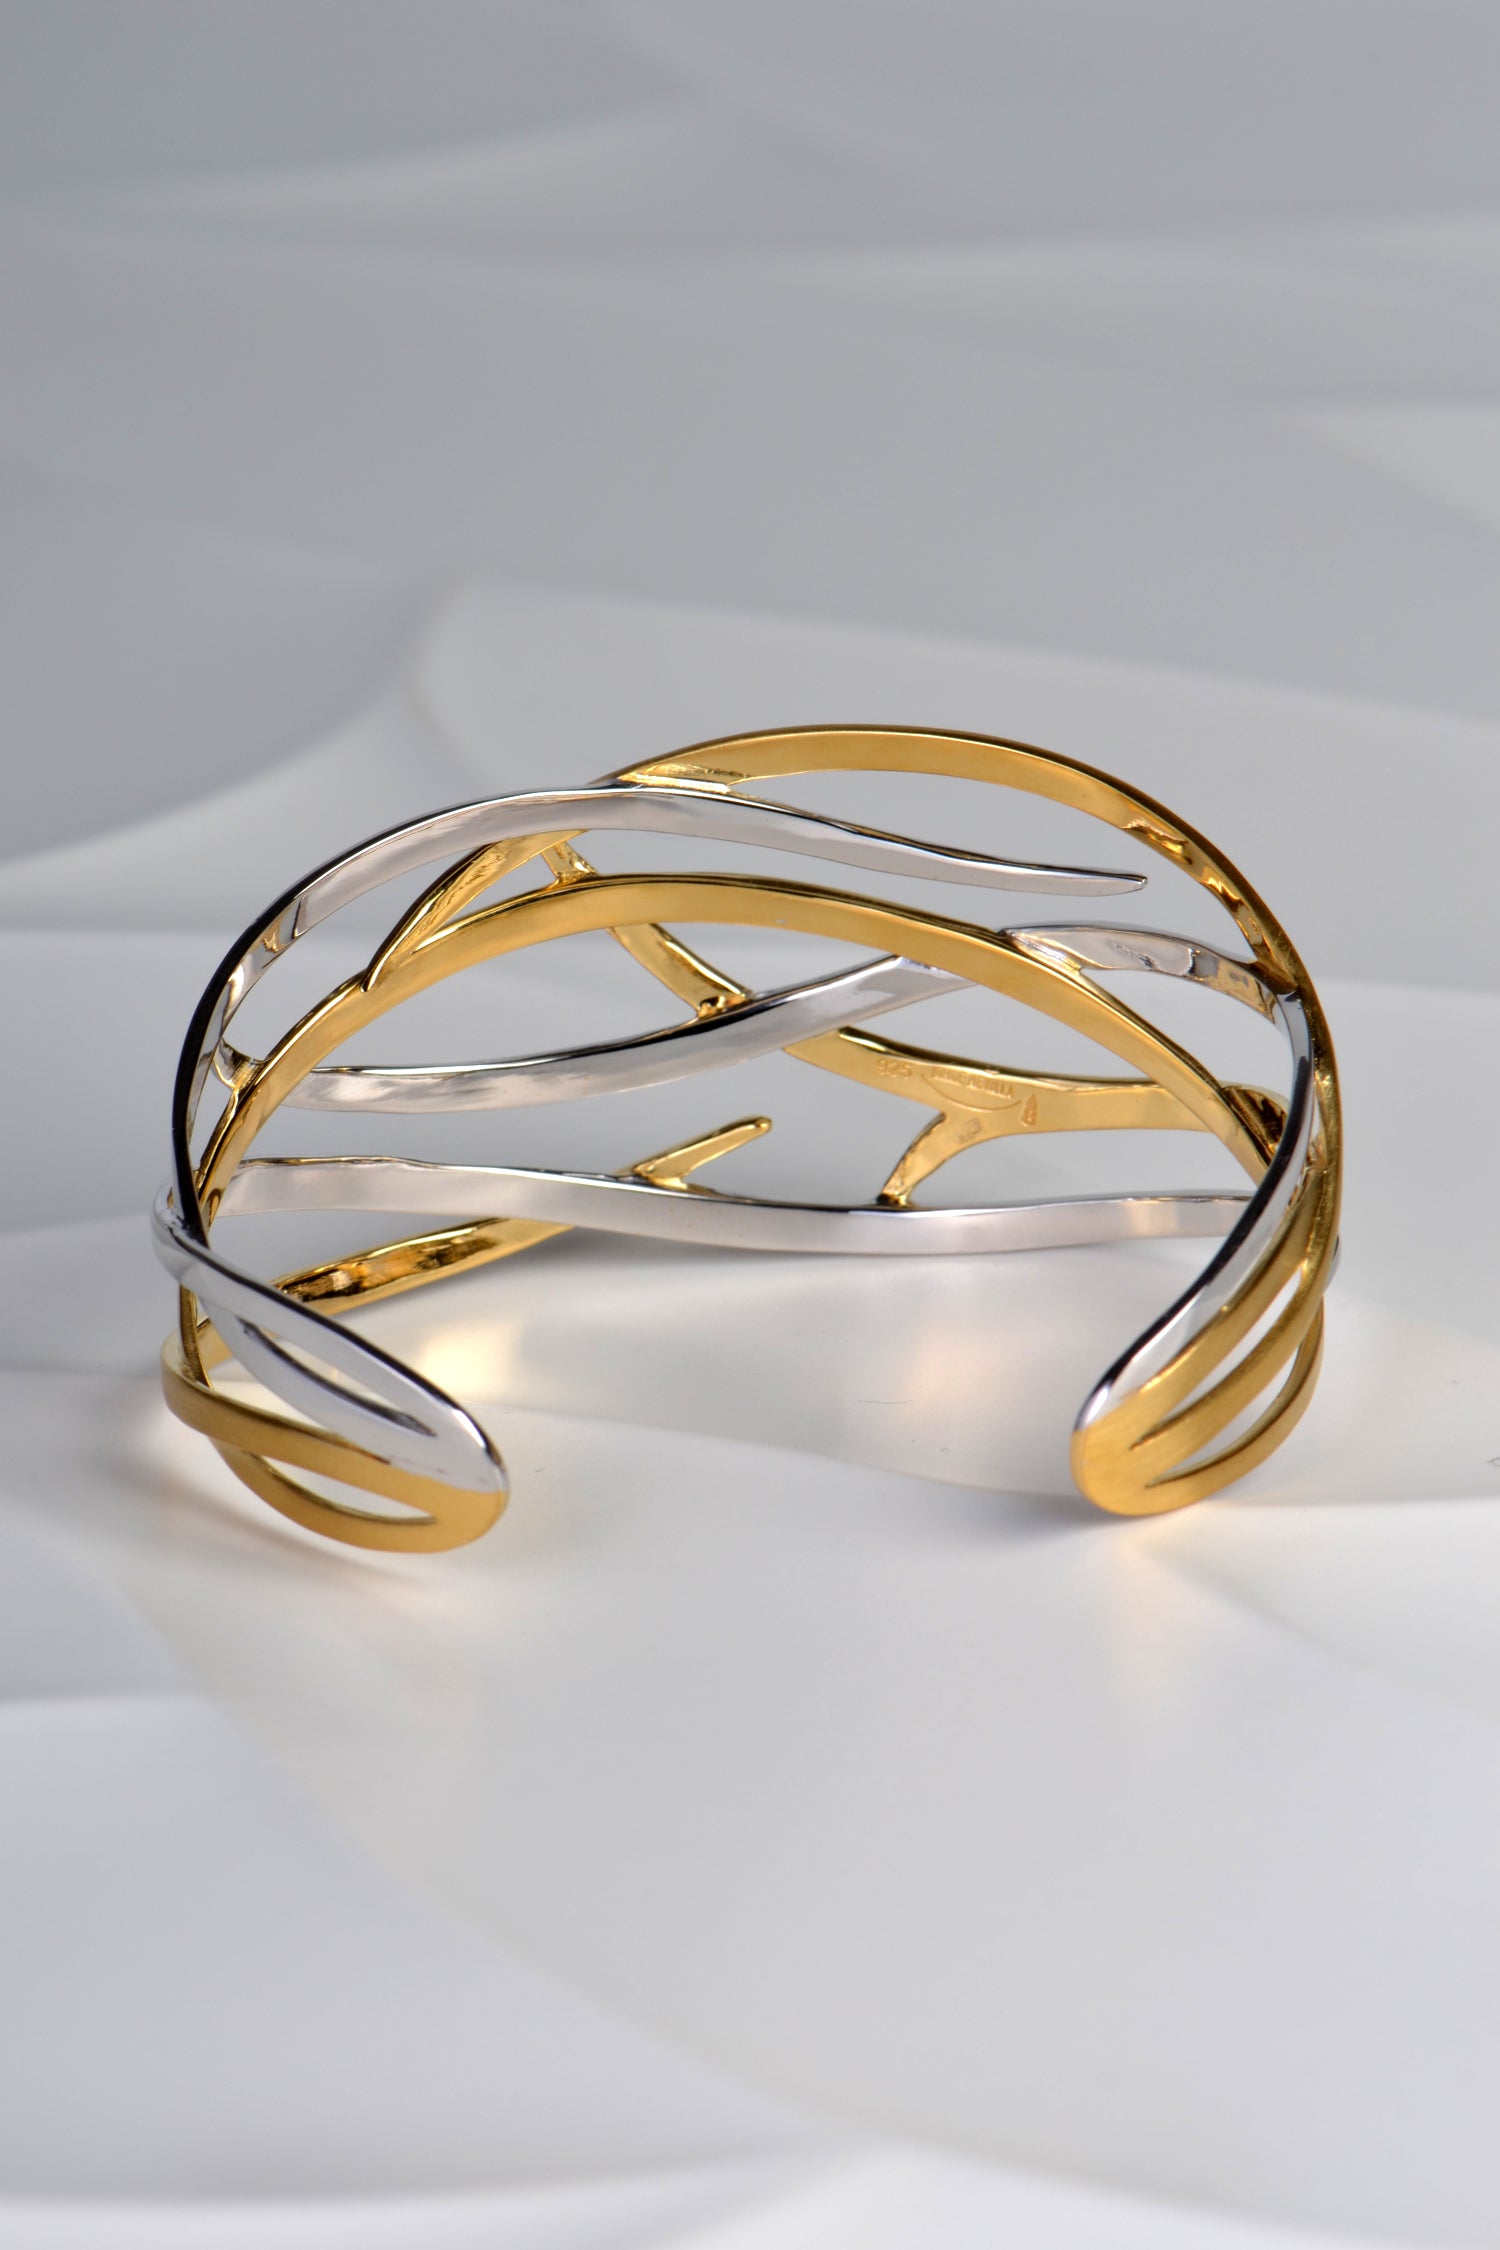 elegant ribbons of silver and 18ct gold plate overlap in this stunning cuff bangle design